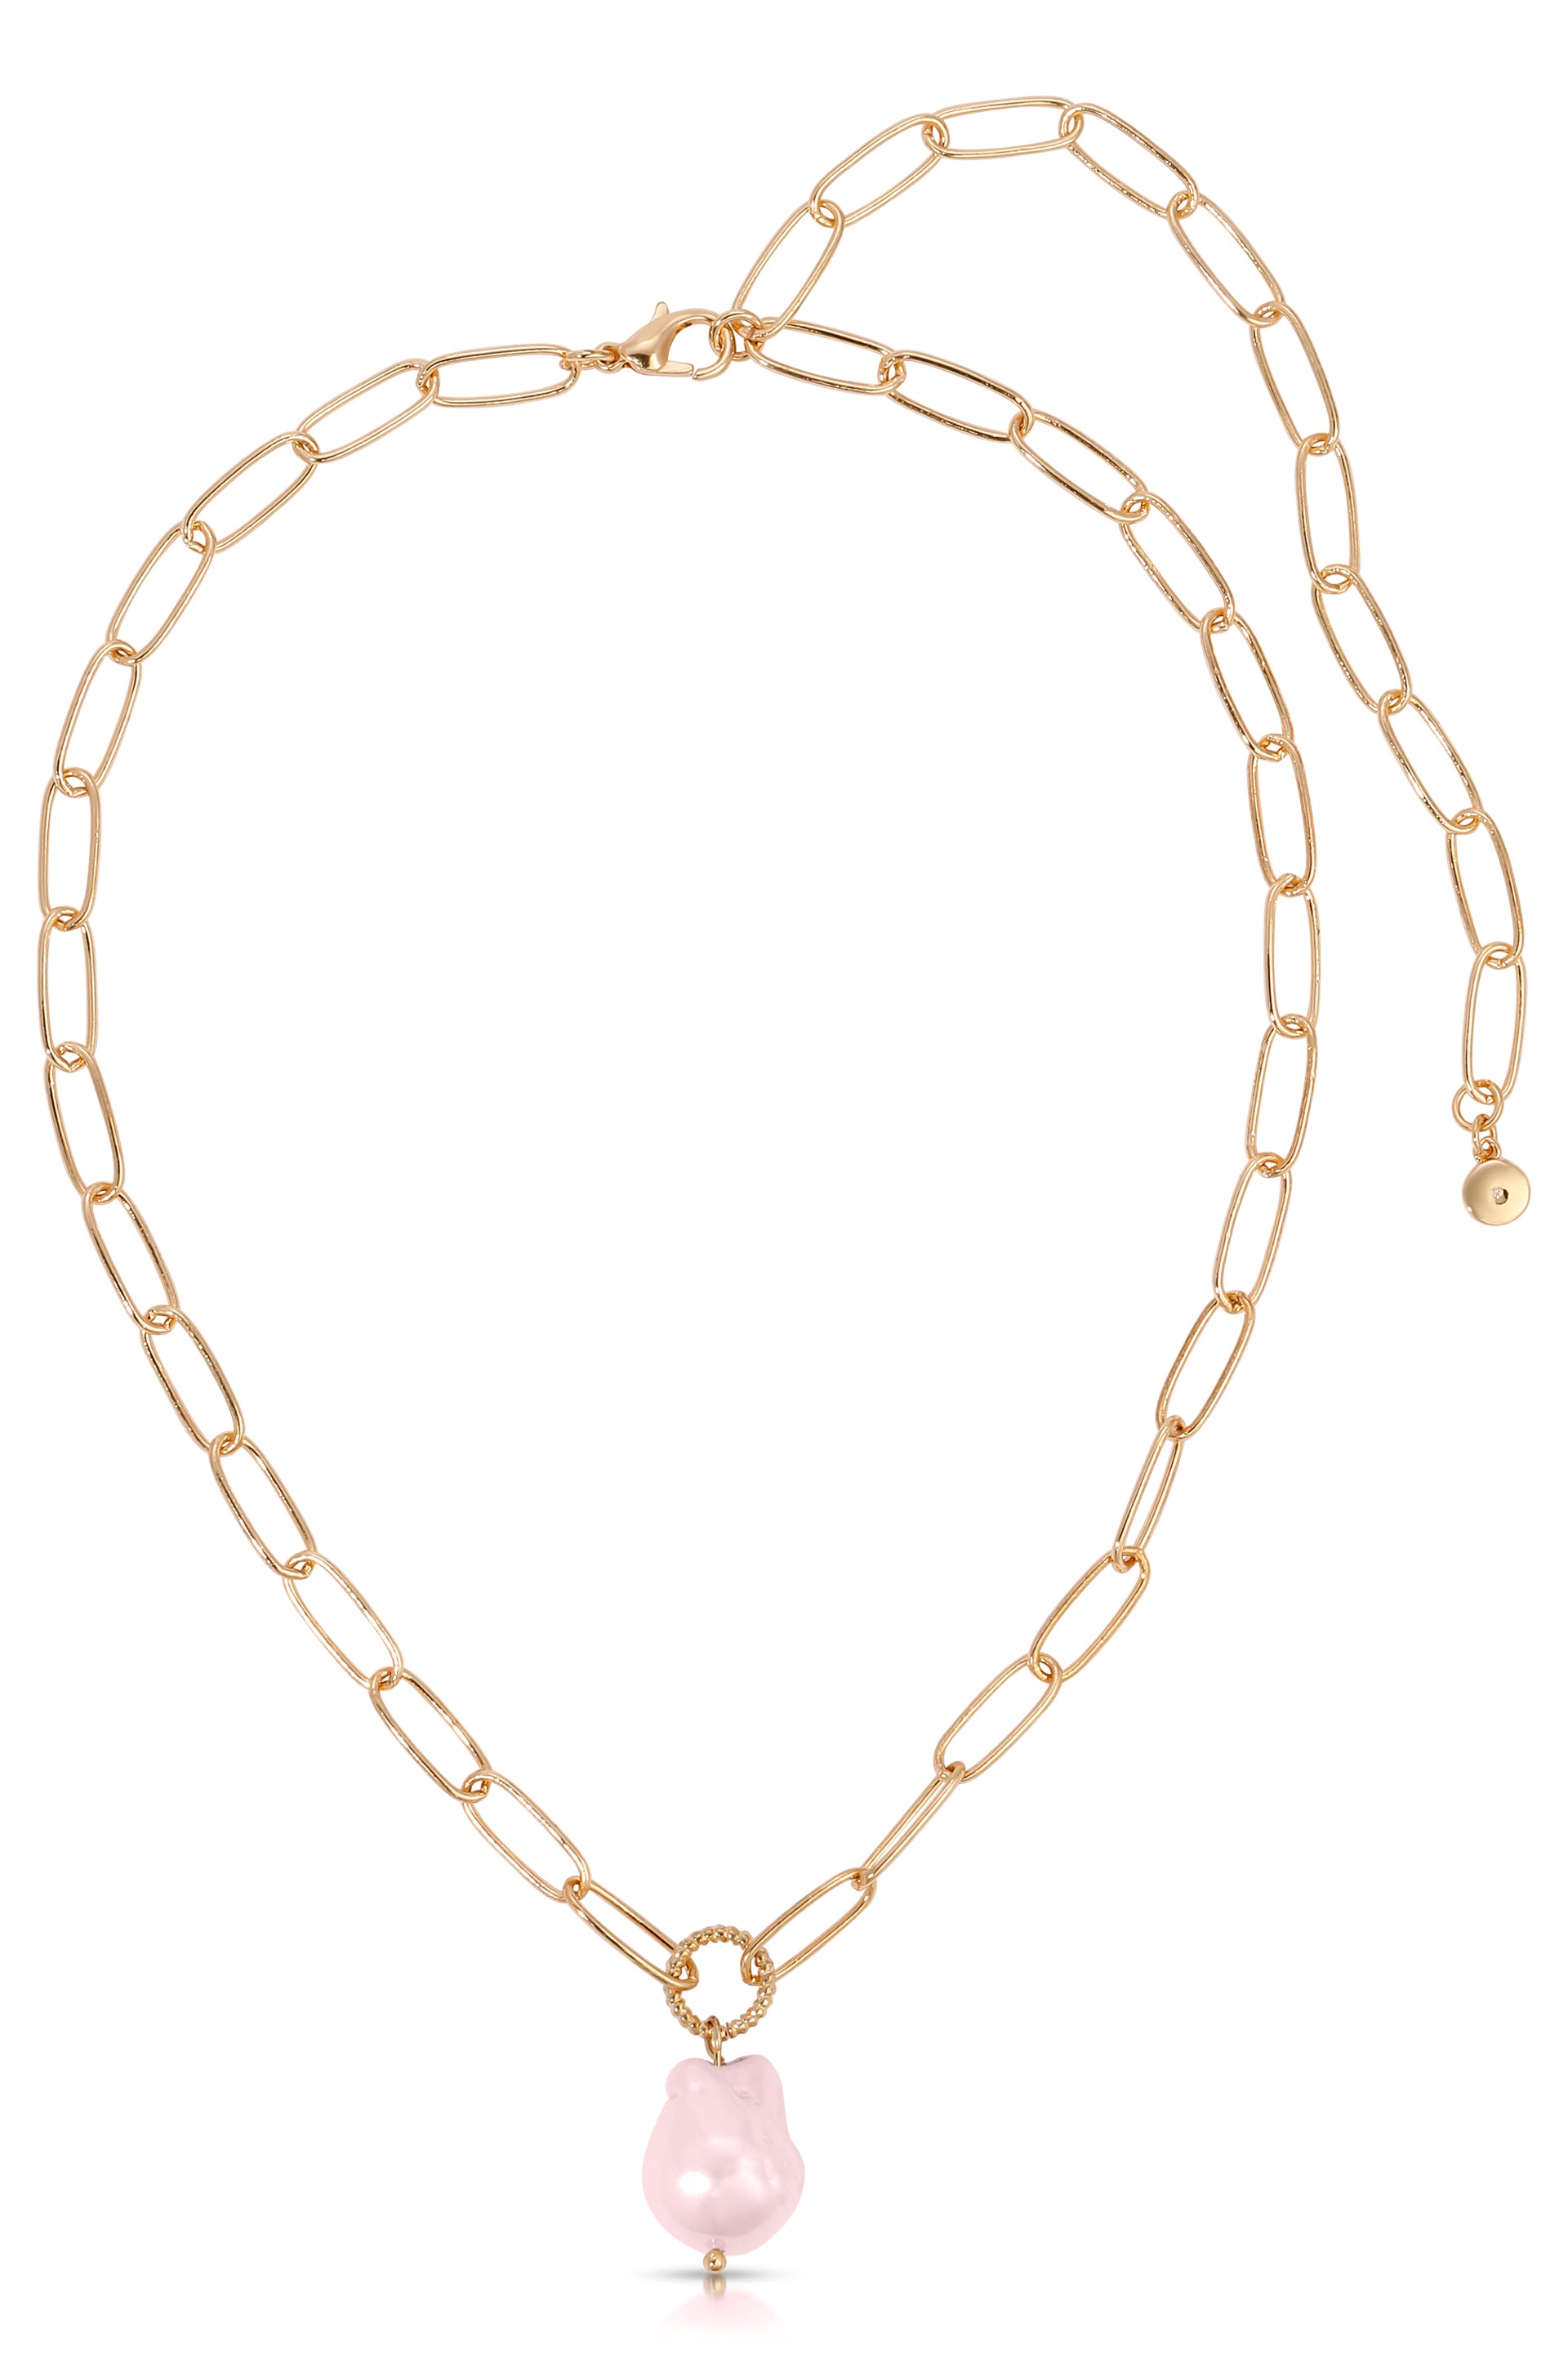 Single Pearl Open Links Chain Necklace in pink pearl full